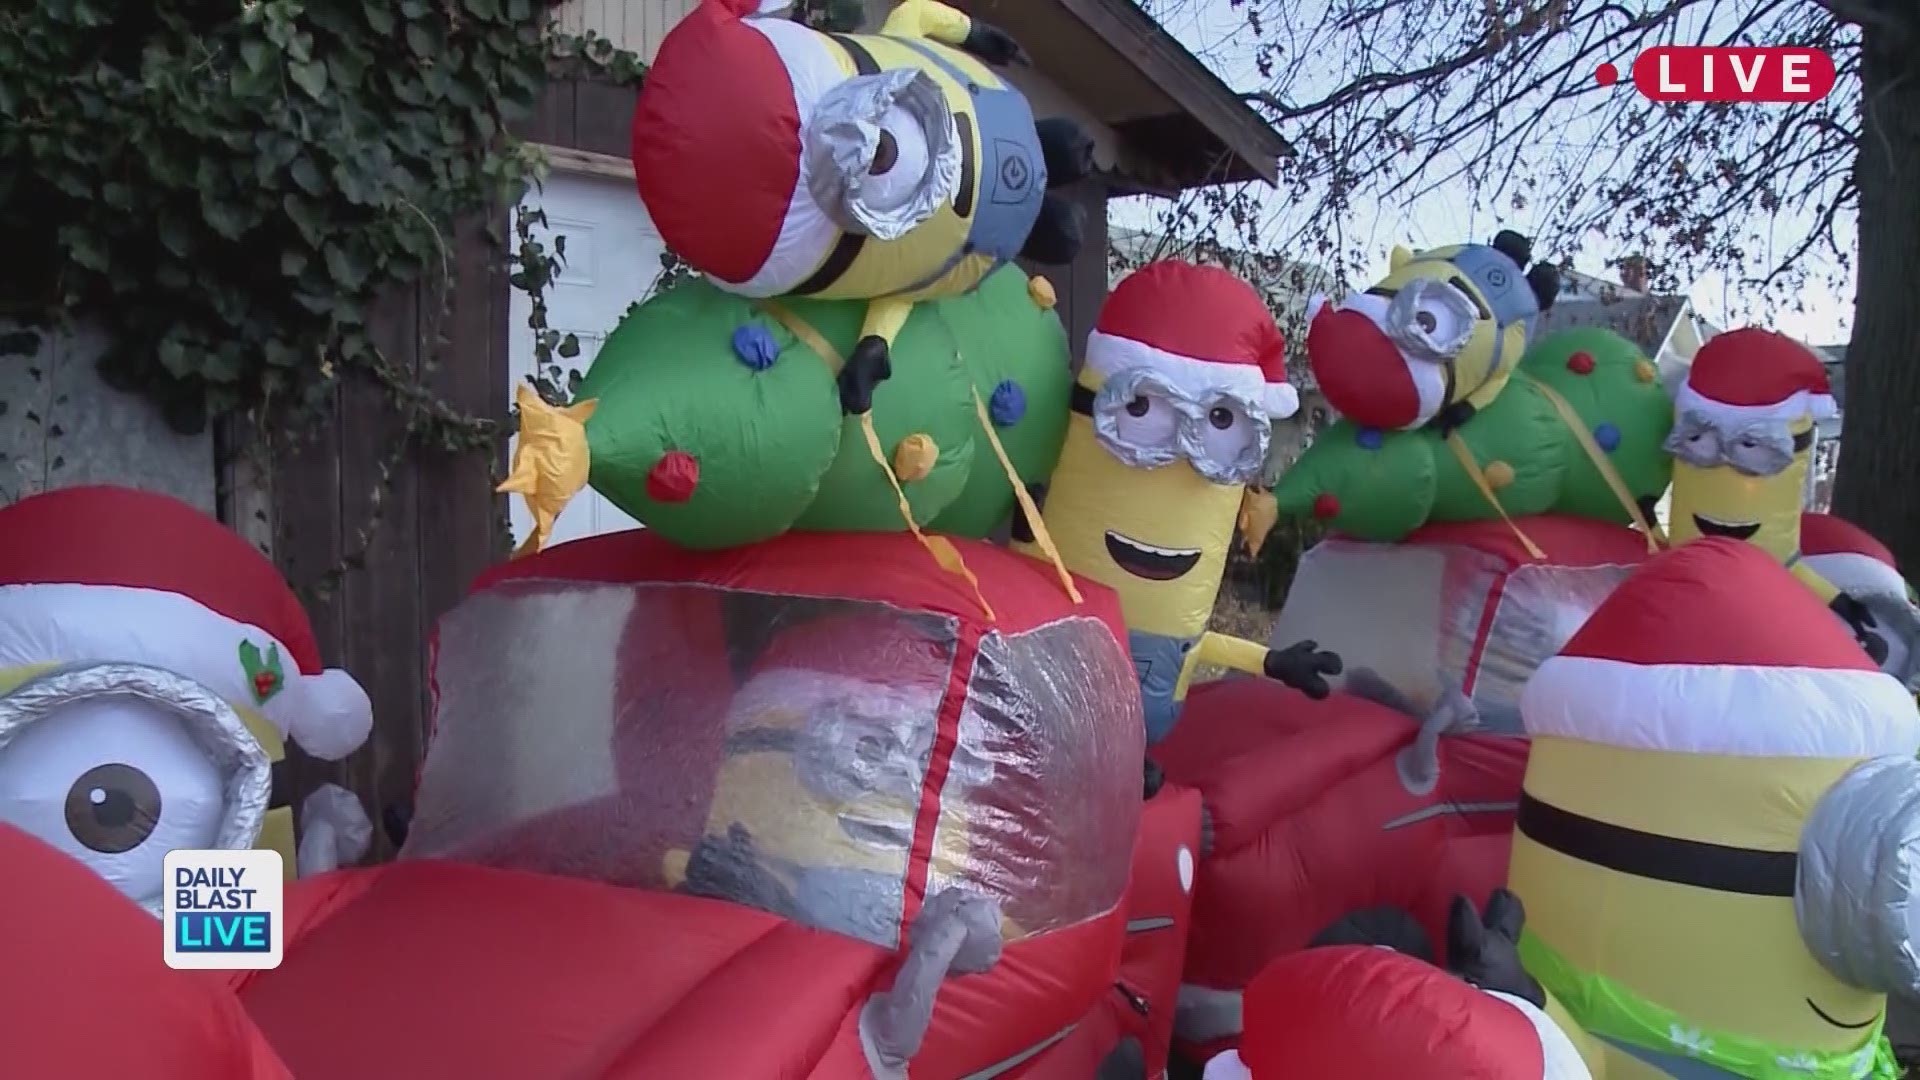 A friendly Christmas decorating contest between neighbors ended in an amazing display in one New Albany, IN yard.  More than 7 million people have already seen it! Michael Pourteau has 70 minions in his yard. The outrageous display took two days and $3,50